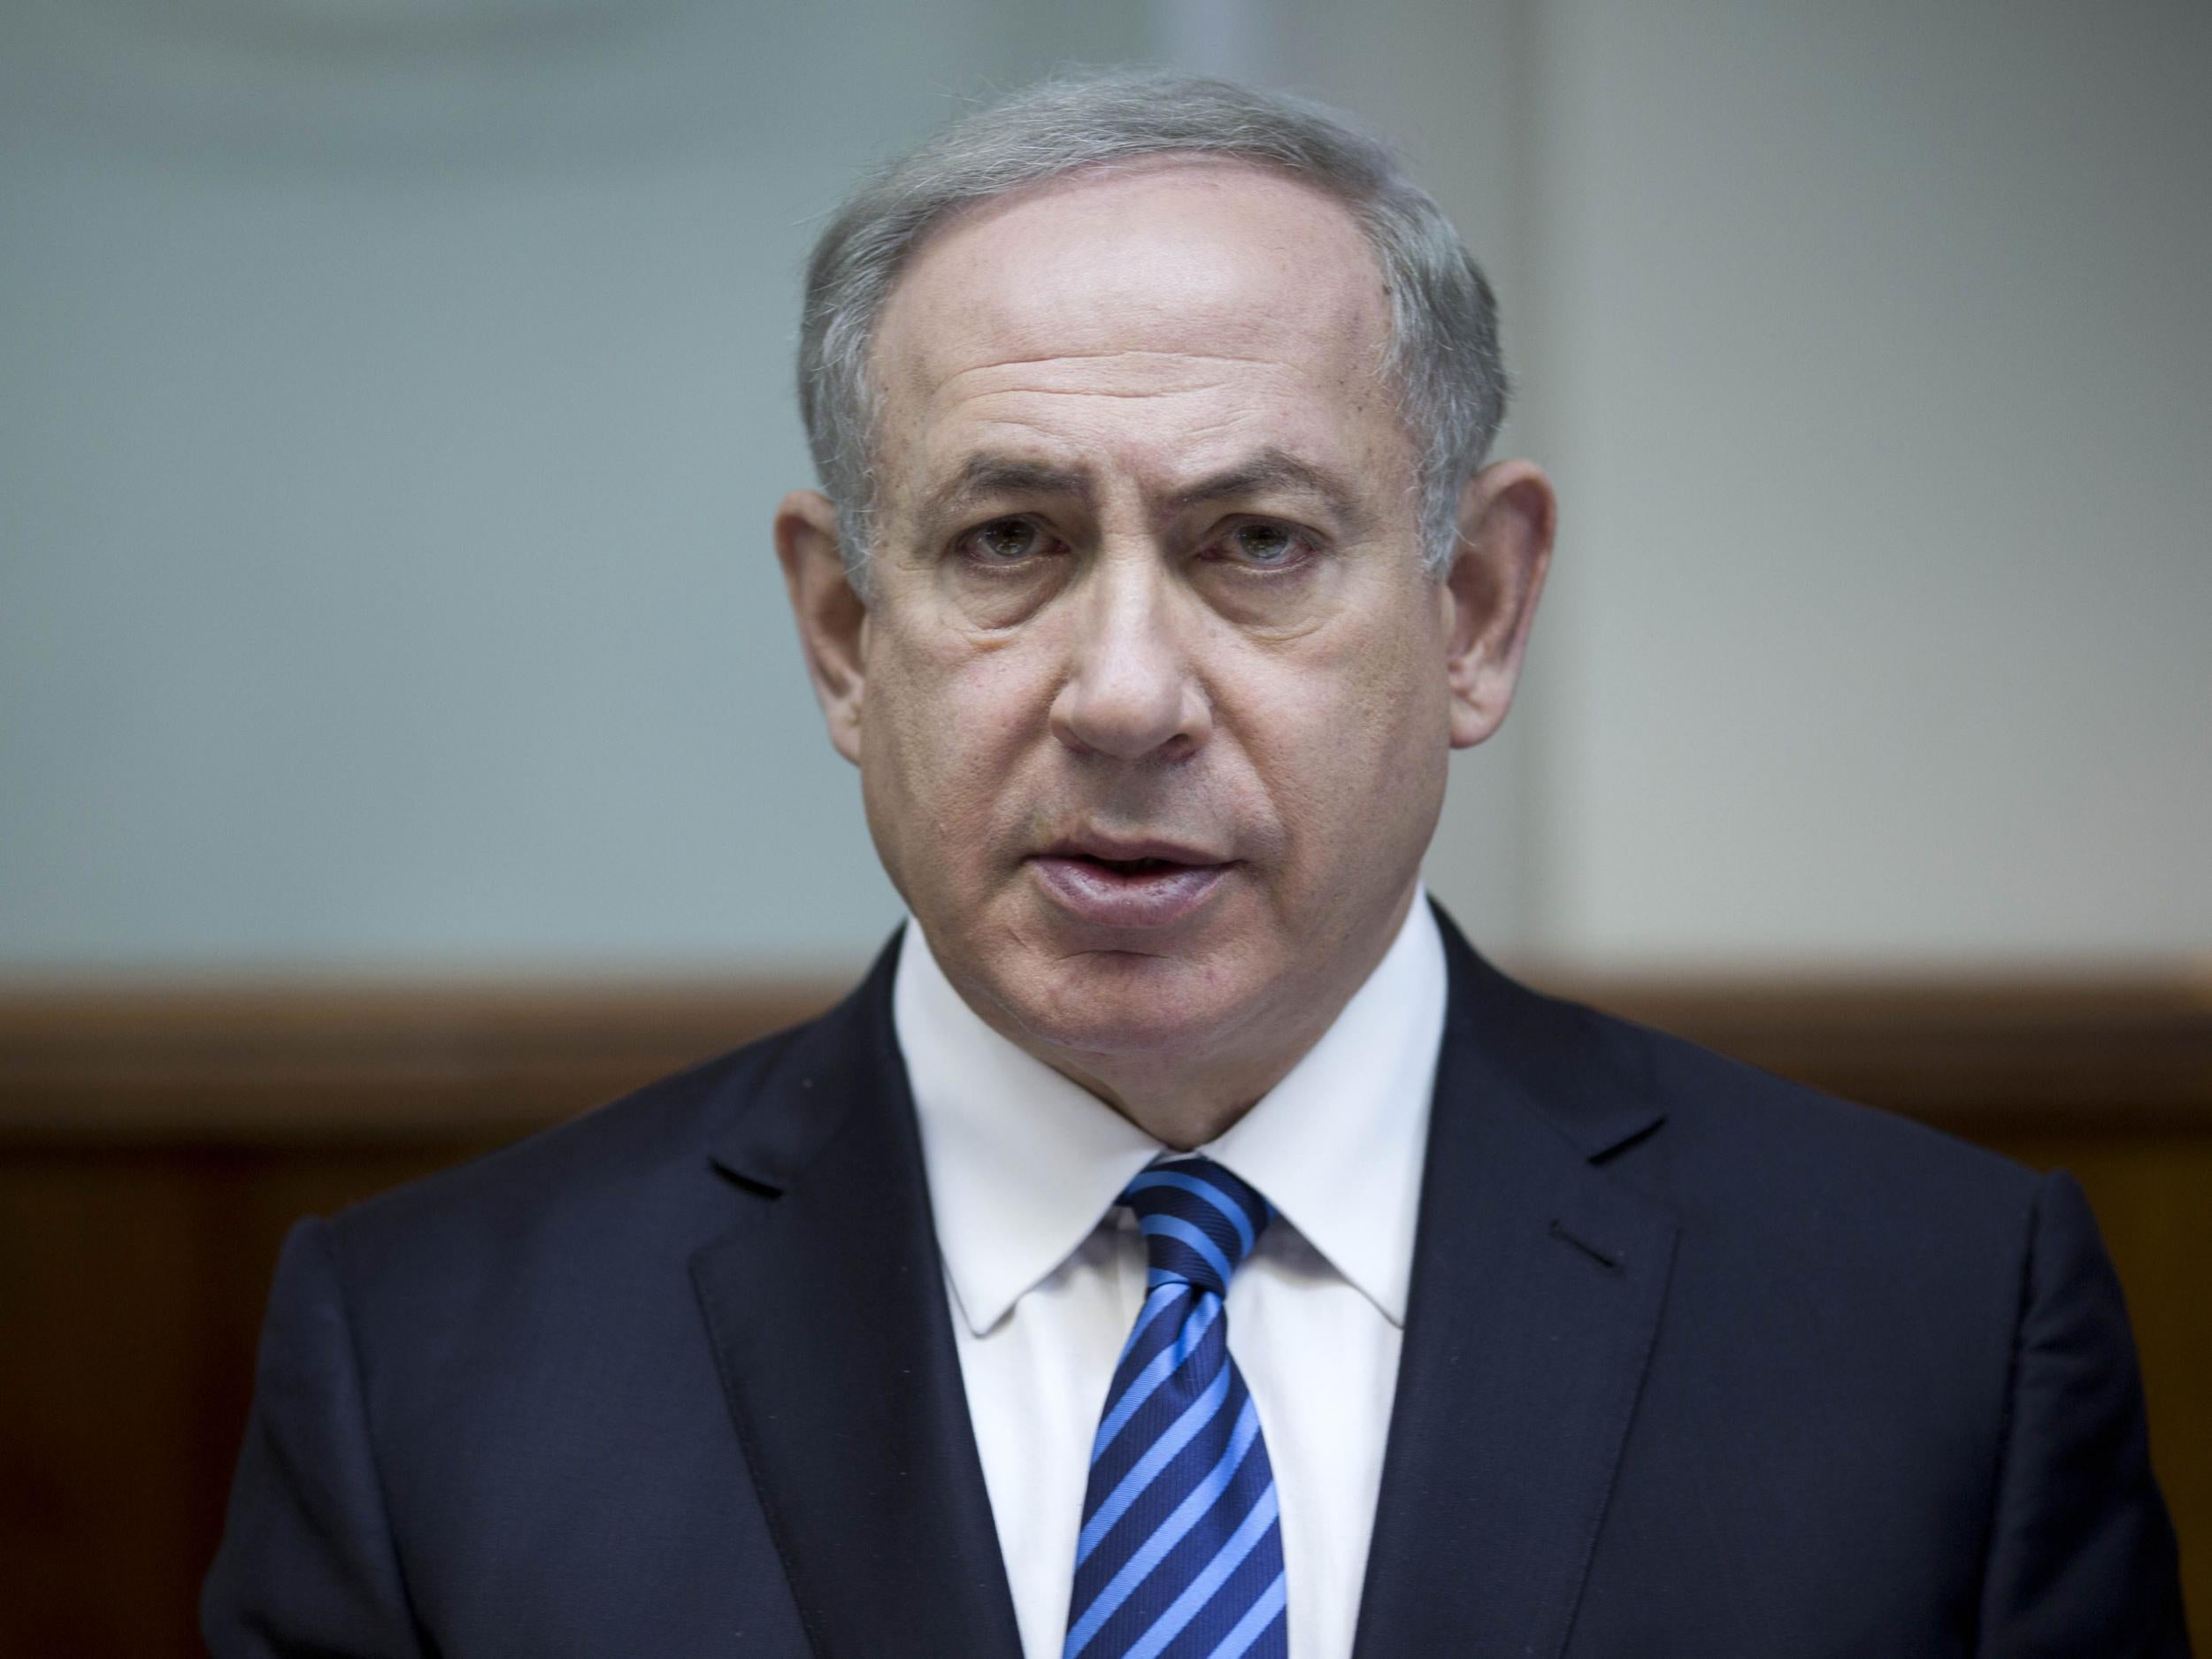 Israel's Prime Minister accused the US Secretary of State of not addressing the 'root' of the conflict